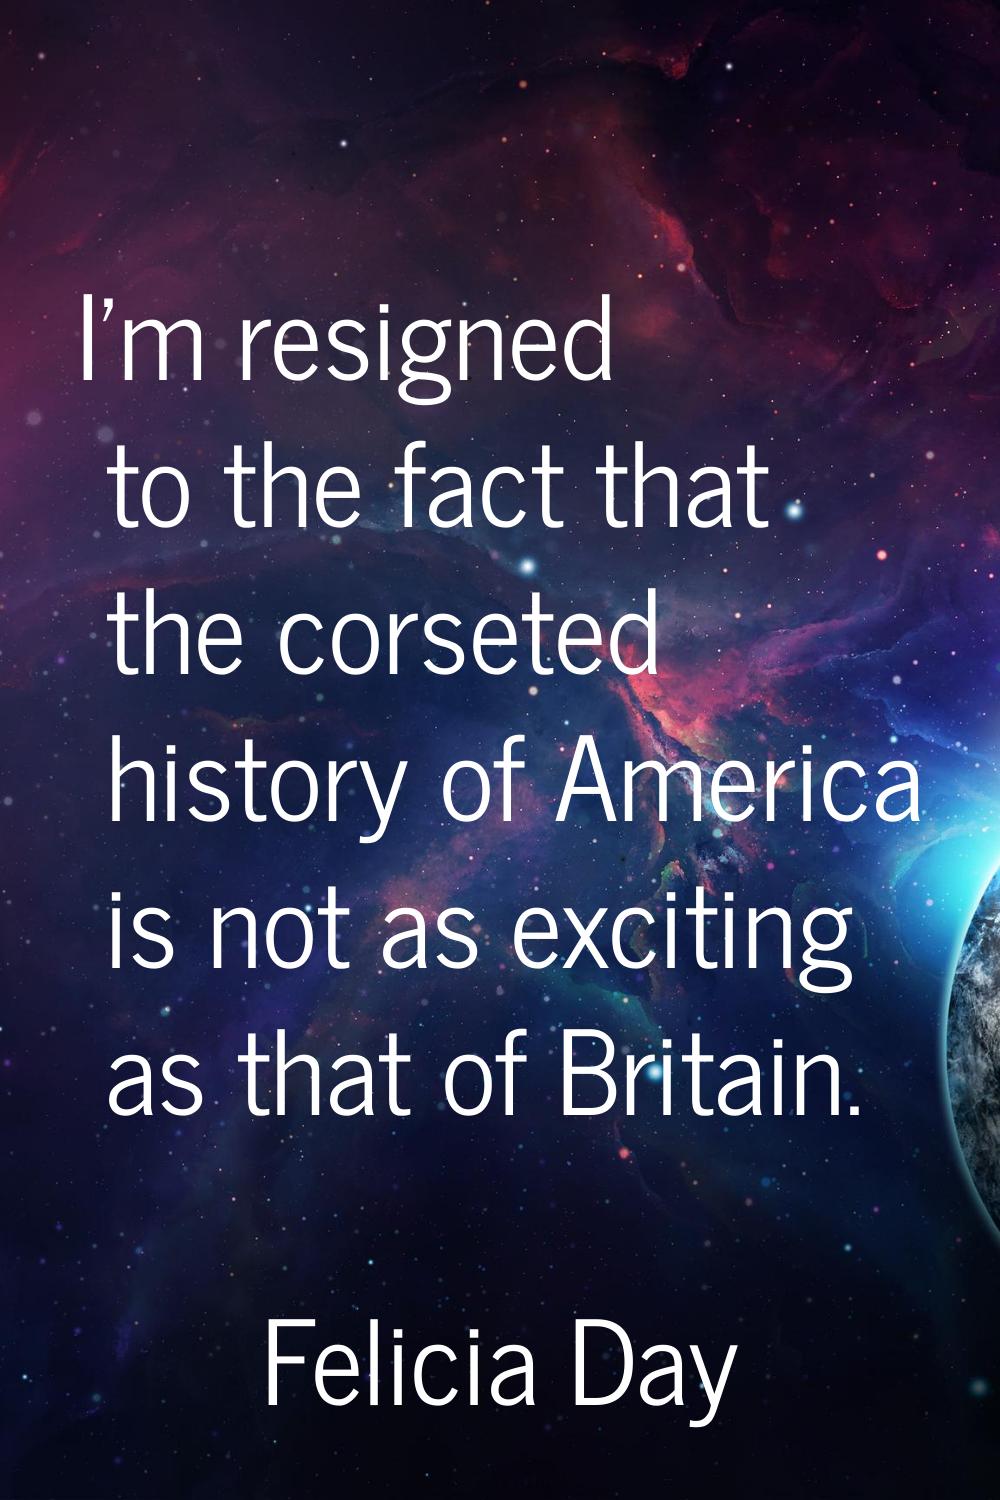 I'm resigned to the fact that the corseted history of America is not as exciting as that of Britain